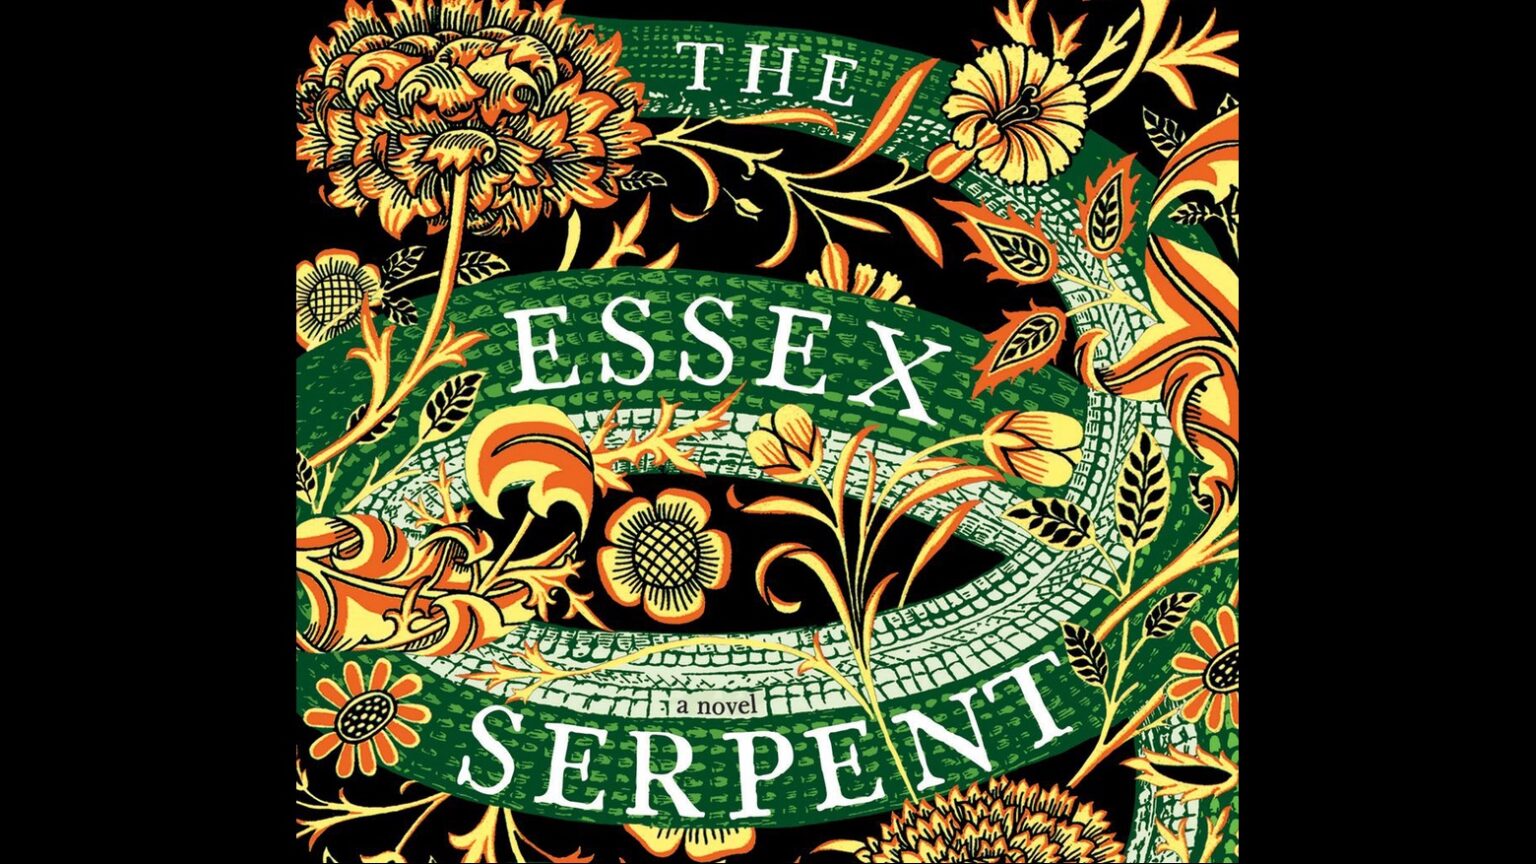 ‘The Essex Serpent’ adapted for Apple TV+ starring Claire Danes